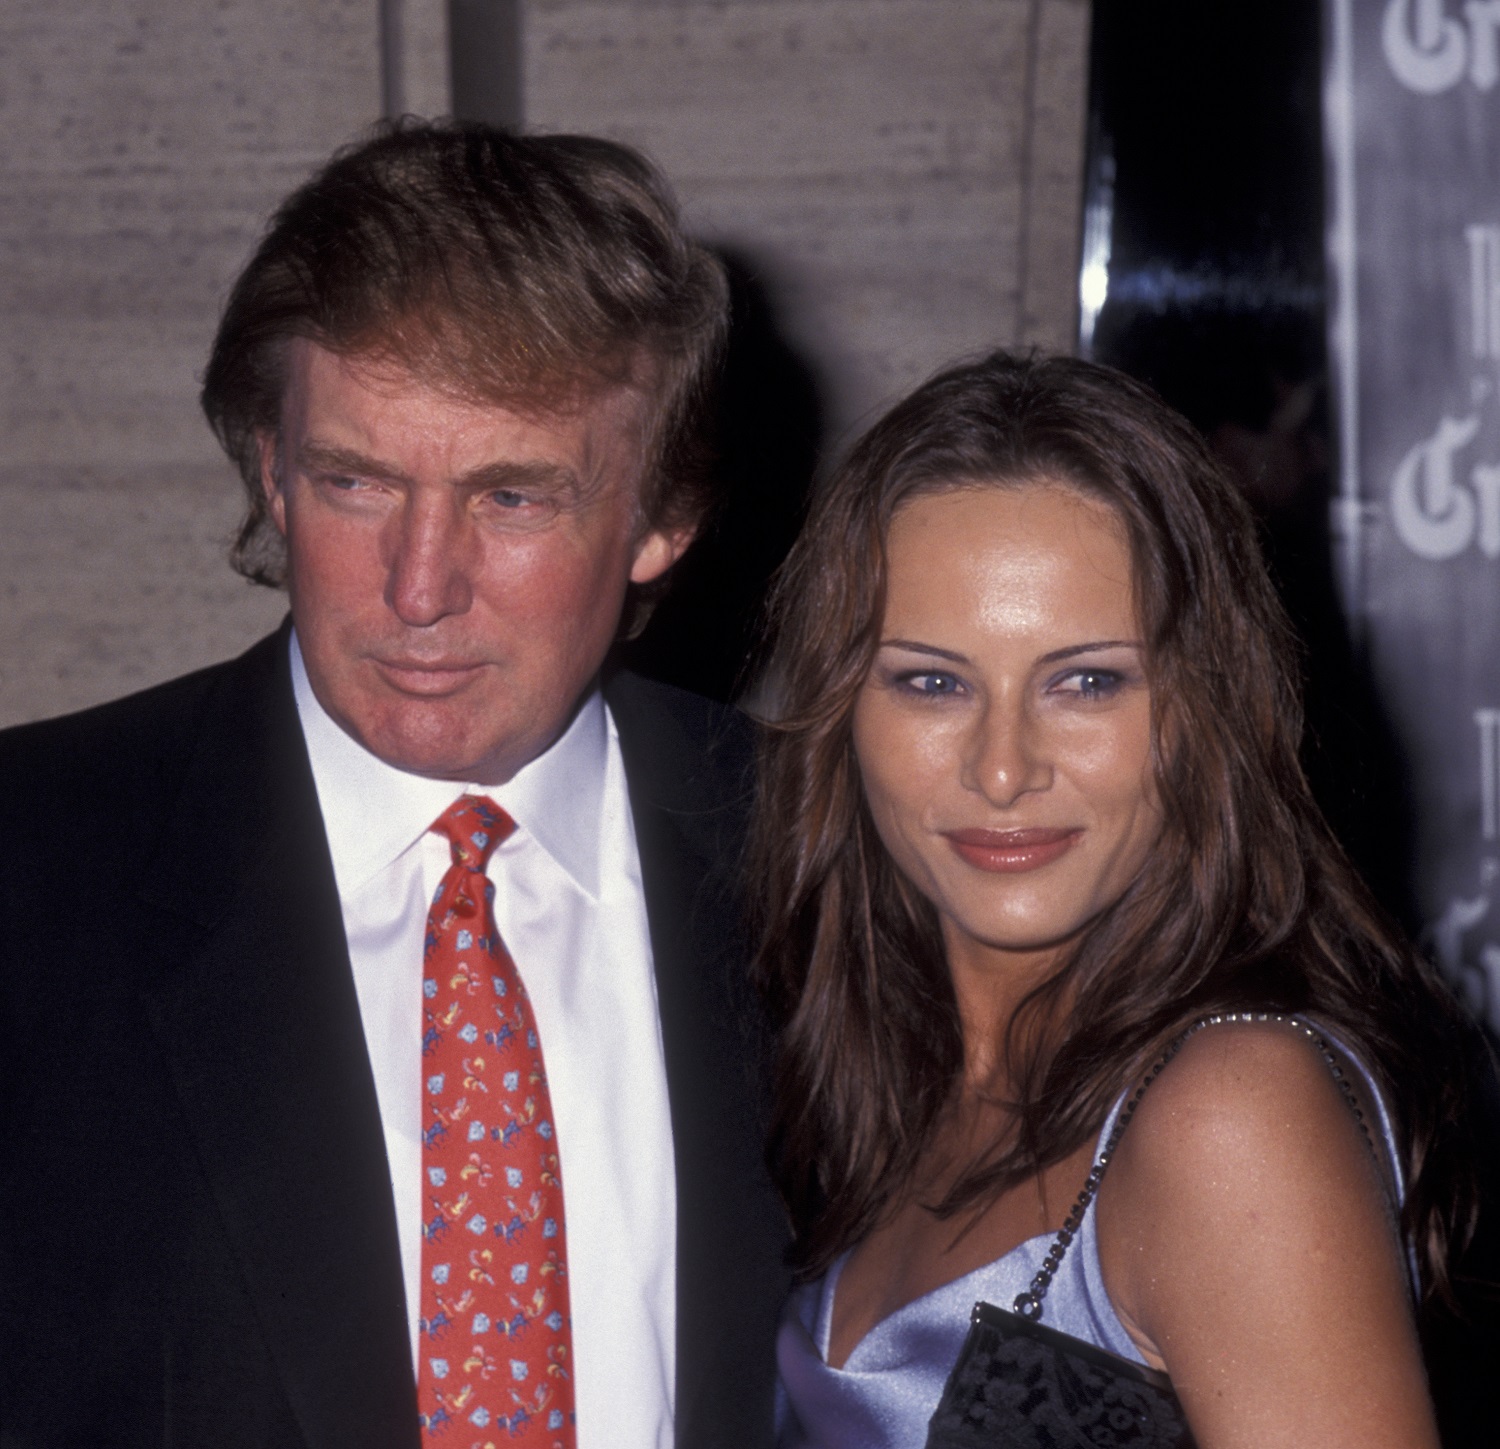 NEW YORK CITY - SEPTEMBER 25: Donald Trump and Melania Trump attend the premiere of "Celebrity" on September 25, 1998 at Avery Fisher Hall at Lincoln Center in New York City. (Photo by Ron Galella/WireImage)